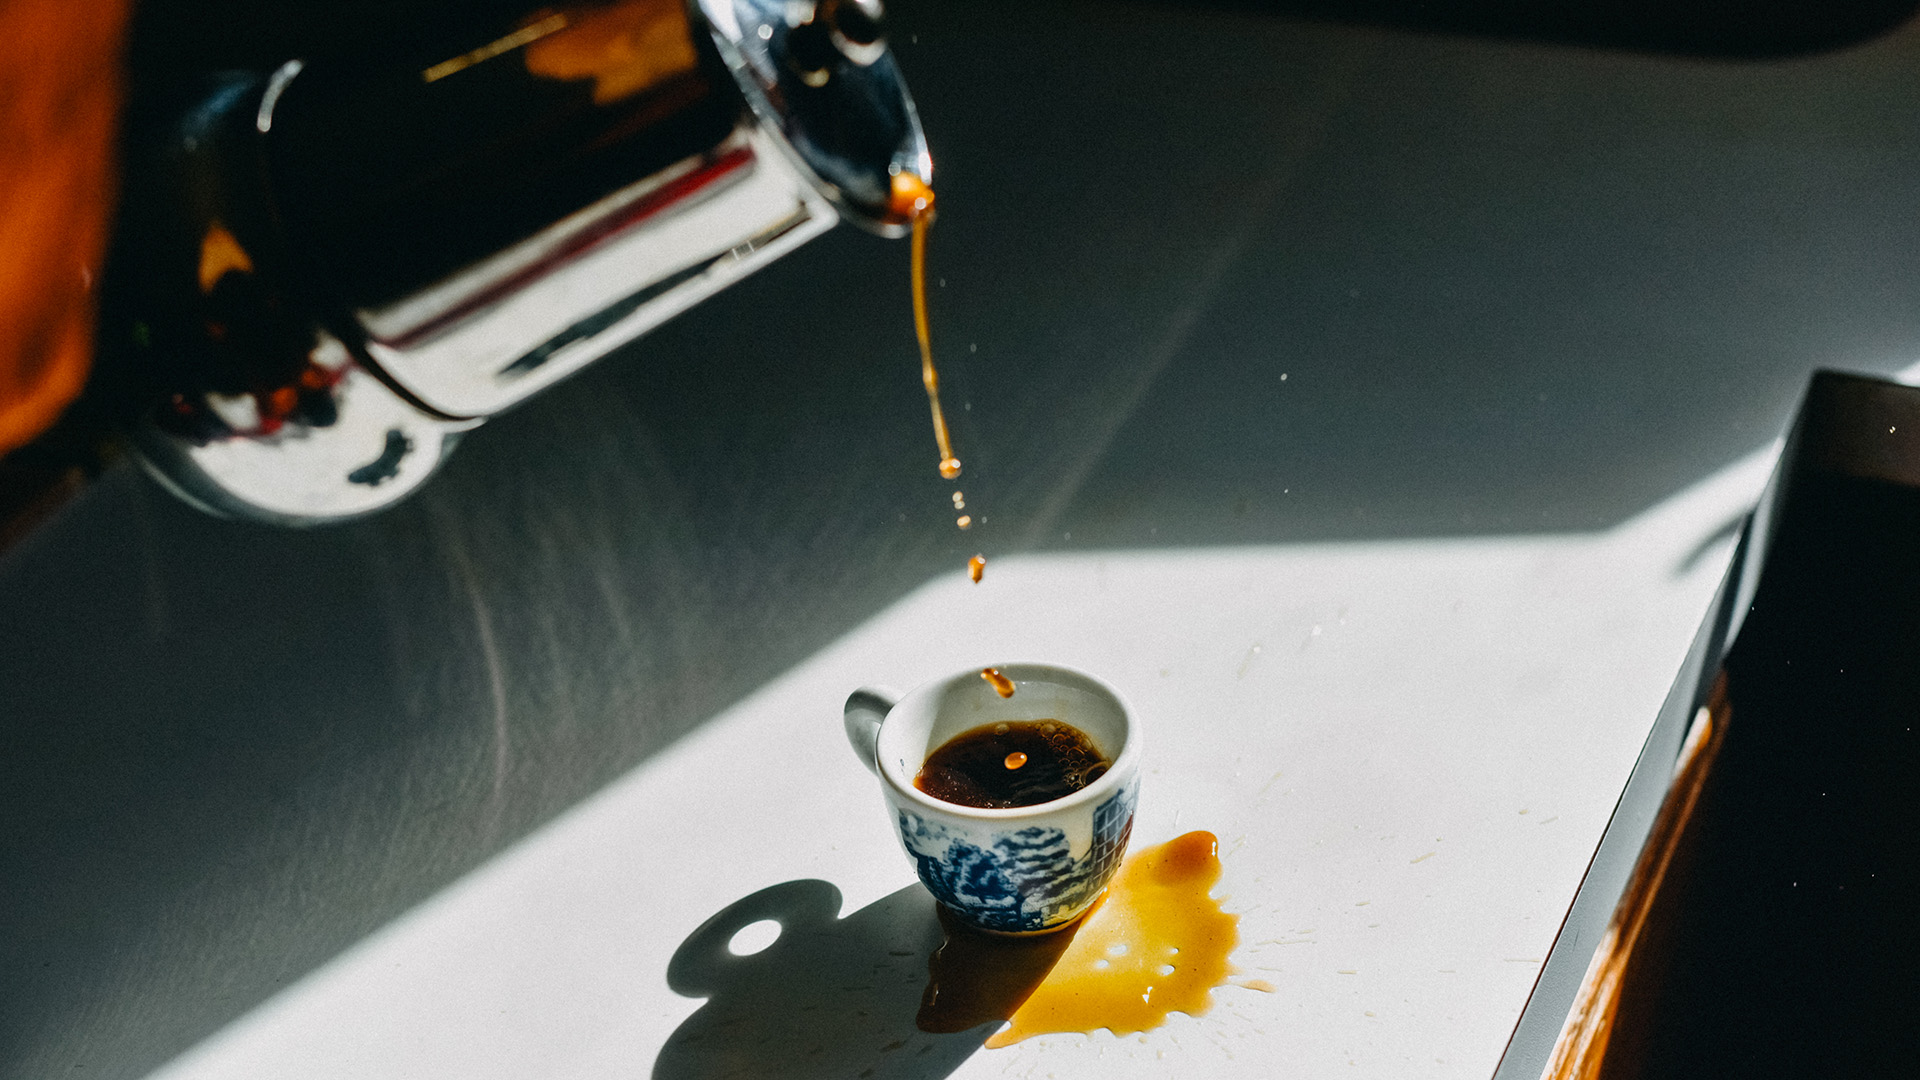 Research suggests that unfiltered coffee can raise your levels of ldl (bad) cholesterol, the waxy, fatty substance that can cause plaque buildup in your arteries (getty images)